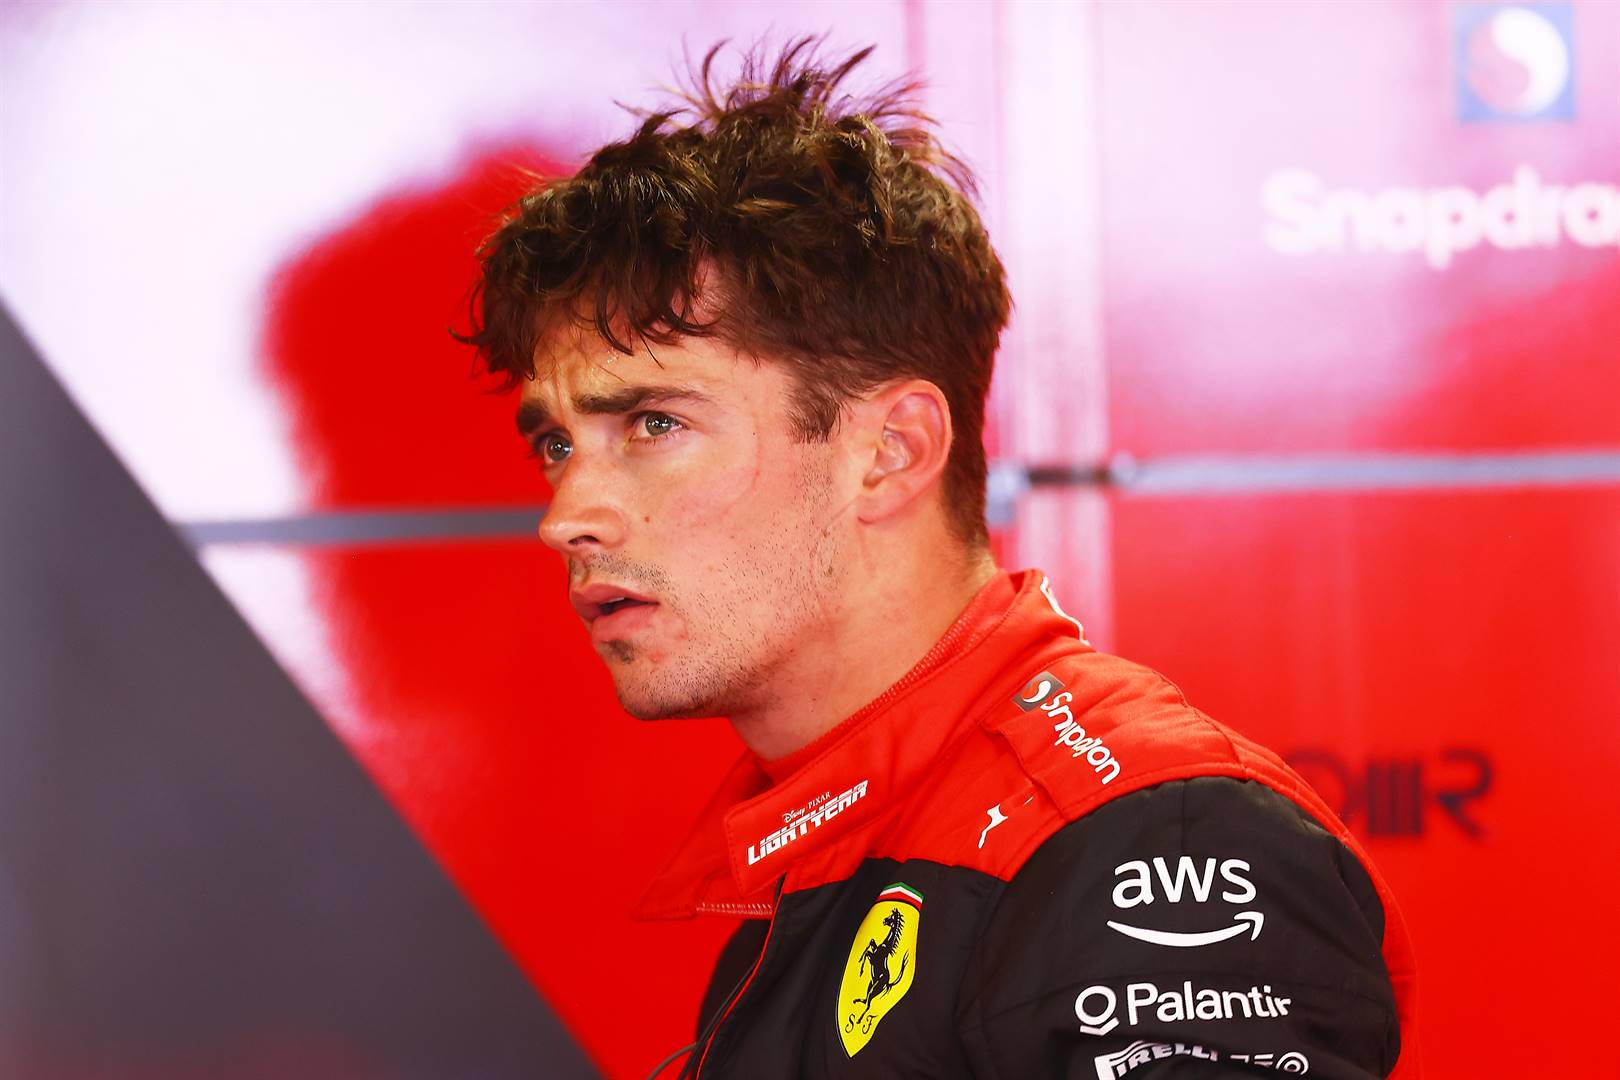 Charles Leclerc of Monaco and Ferrari looks on in the garage during final practice ahead of the F1 Grand Prix in Monte-Carlo, Monaco today. Photo: Eric Alonso / Getty Images